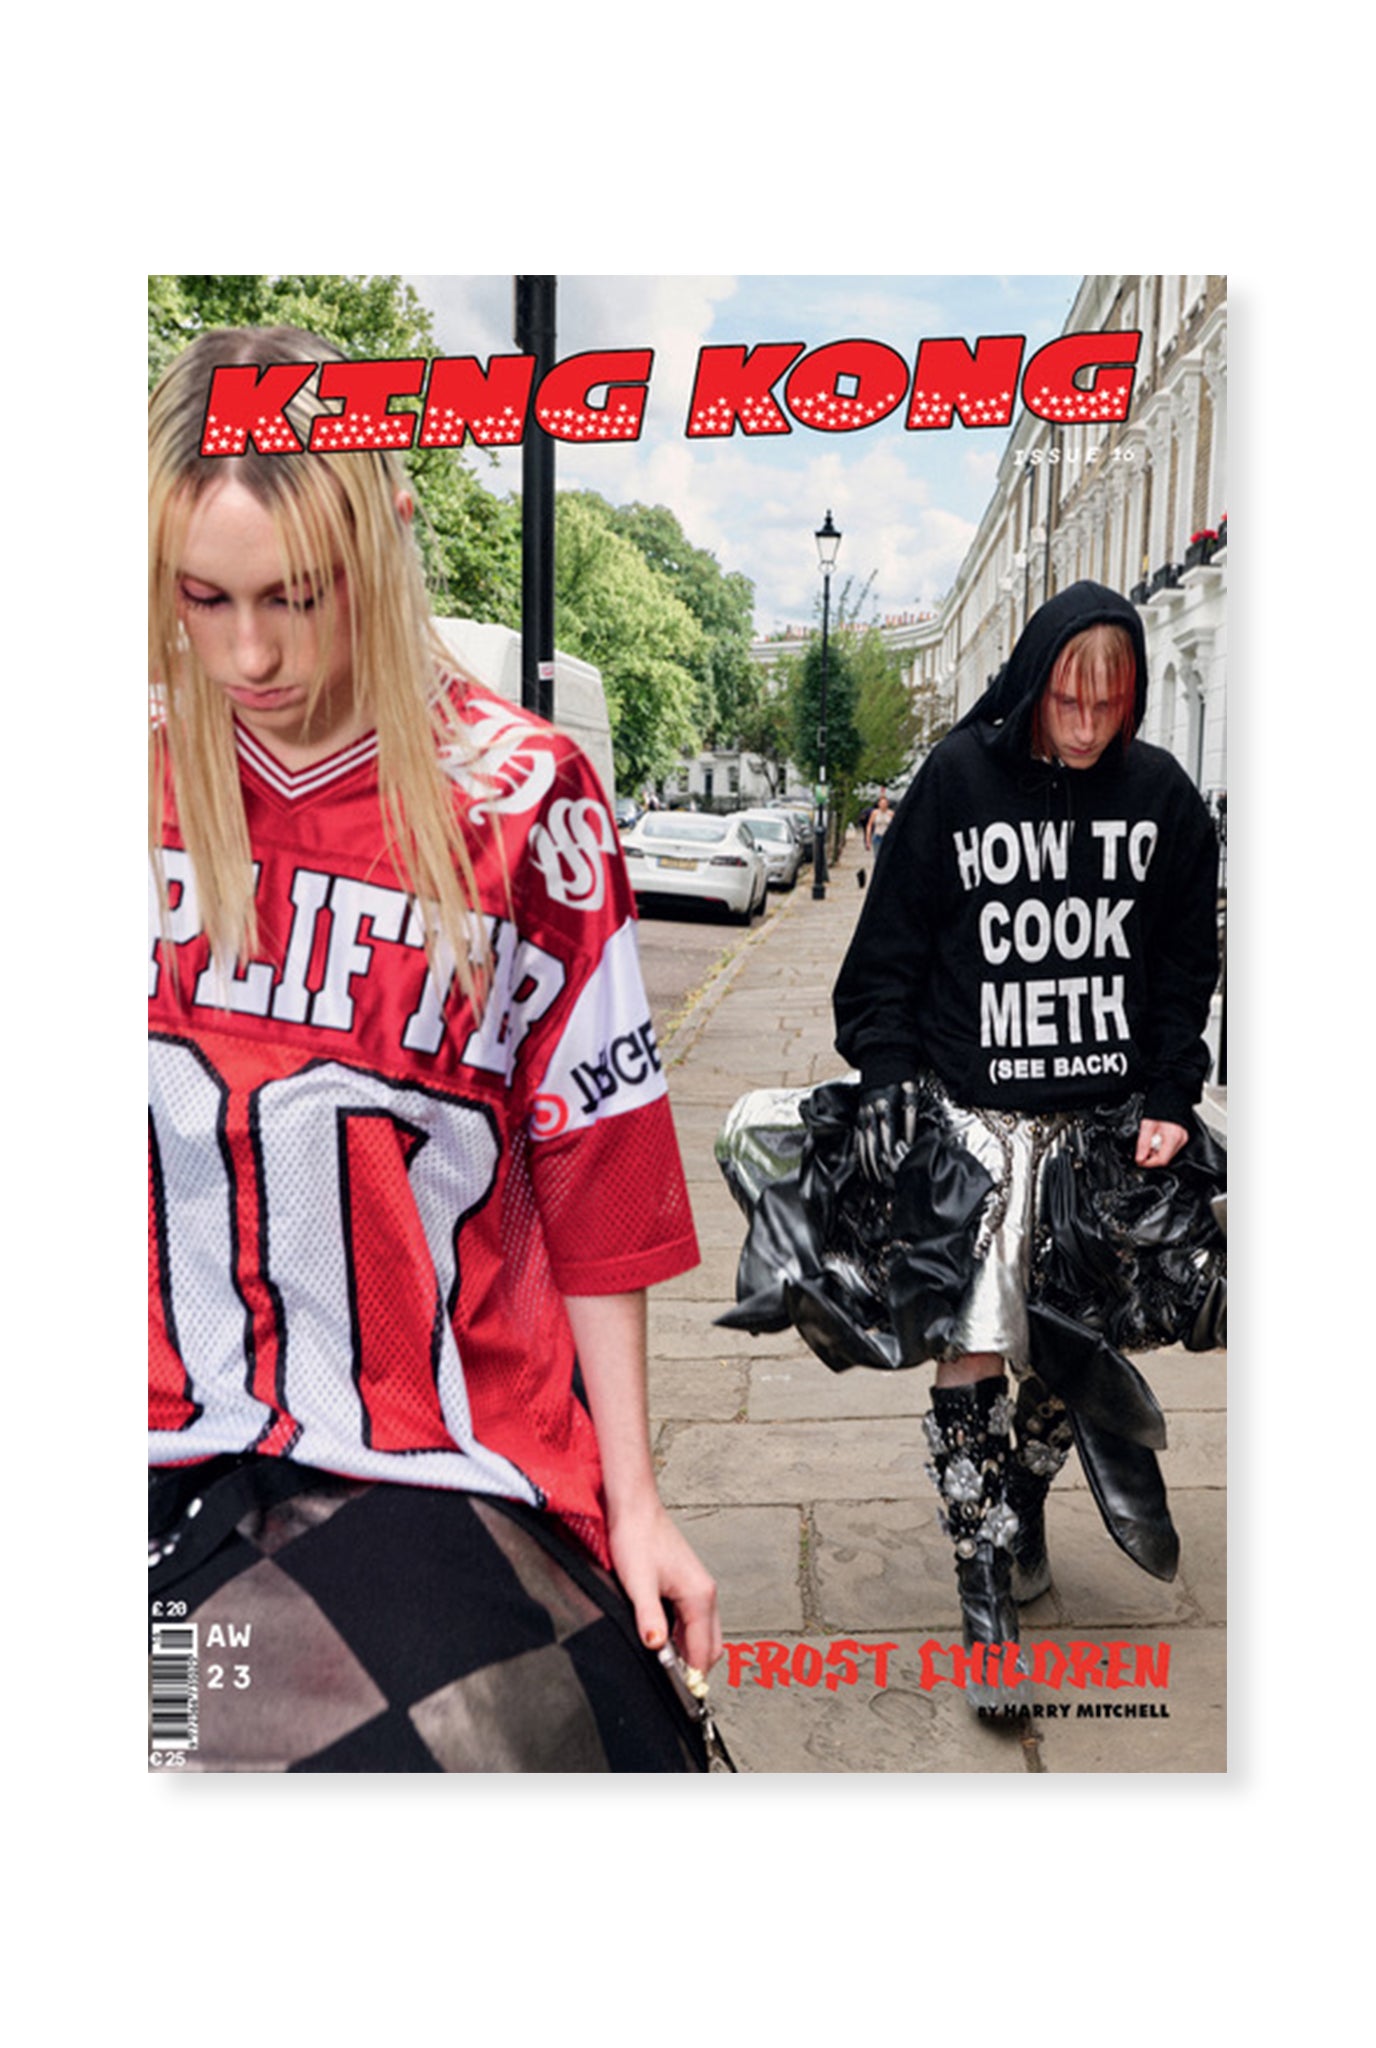 King Kong, Issue 16